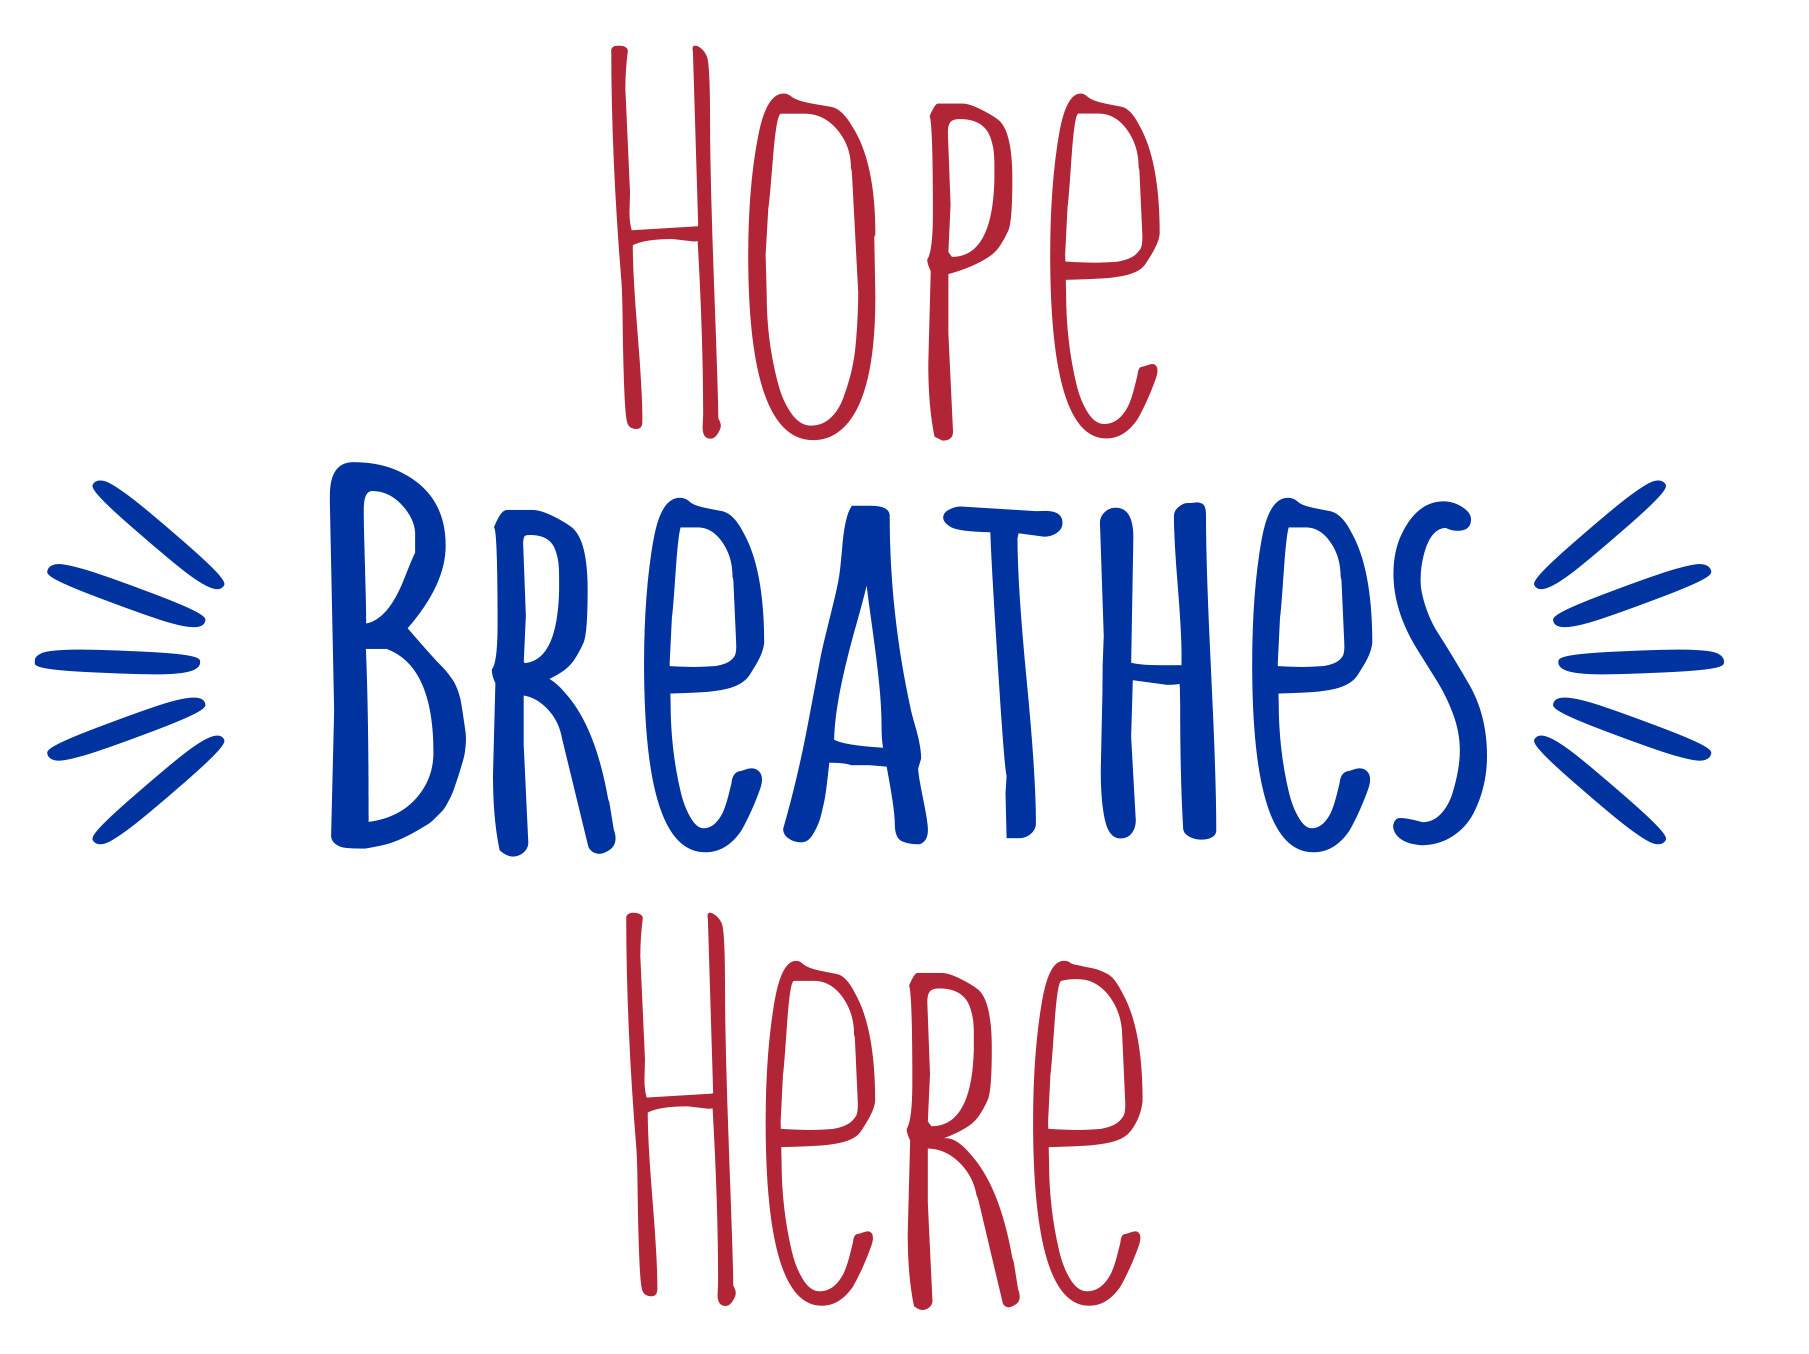 cpff-hope-breathes-here-logo-stacked-highres.jpg